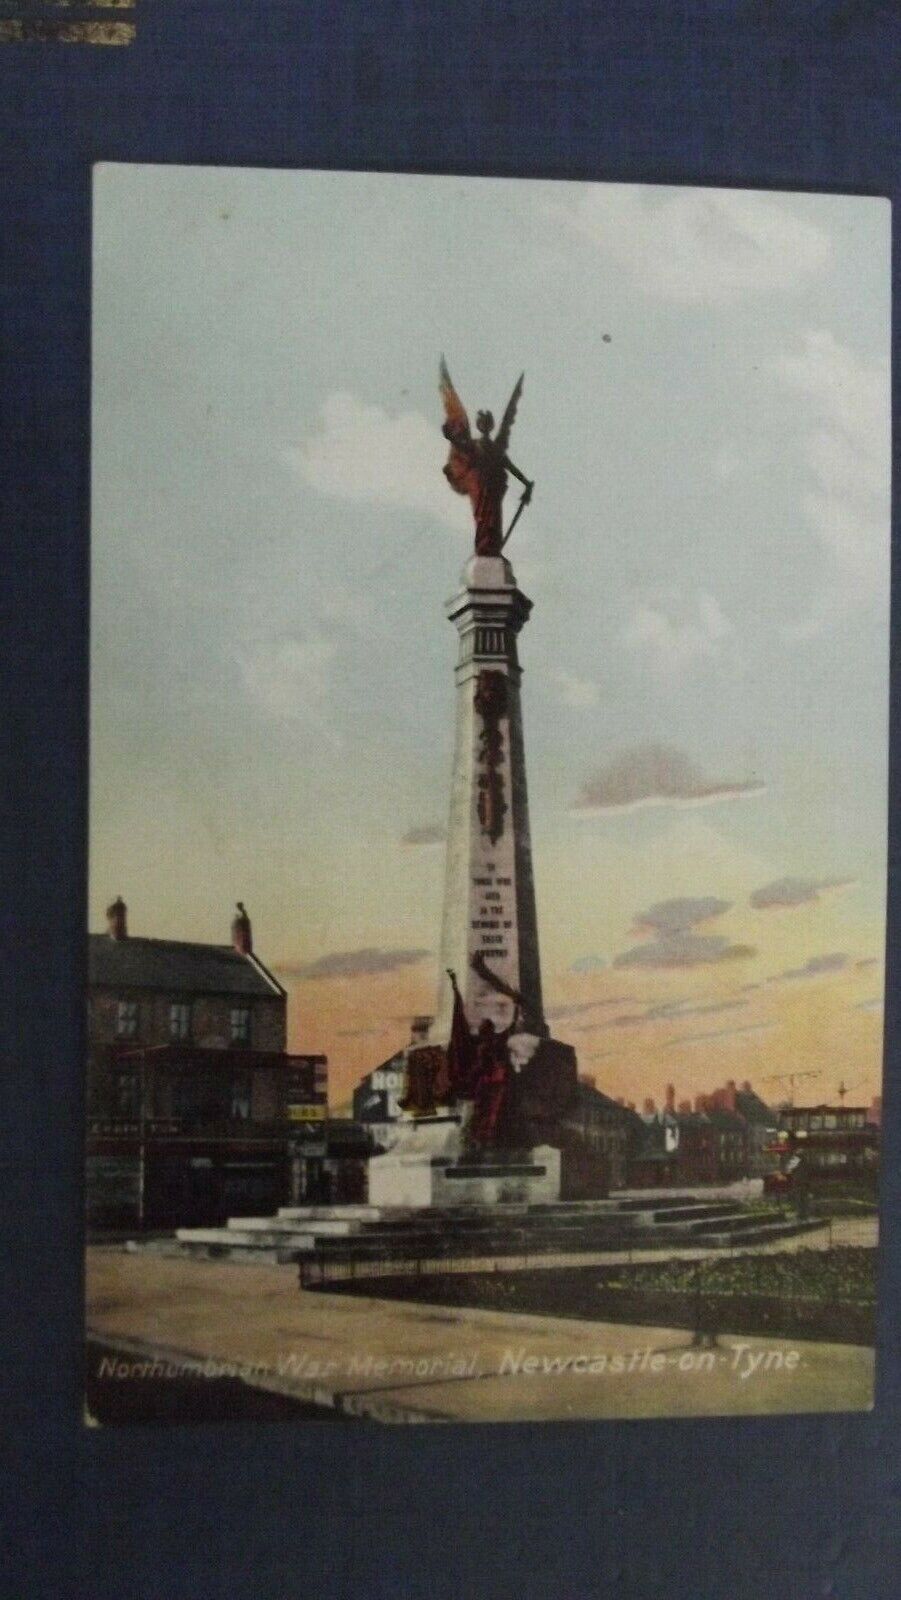 House Clearance - Northumberland War Memorial Newcastle upon Tyne R B  P/card 1979 Unposted